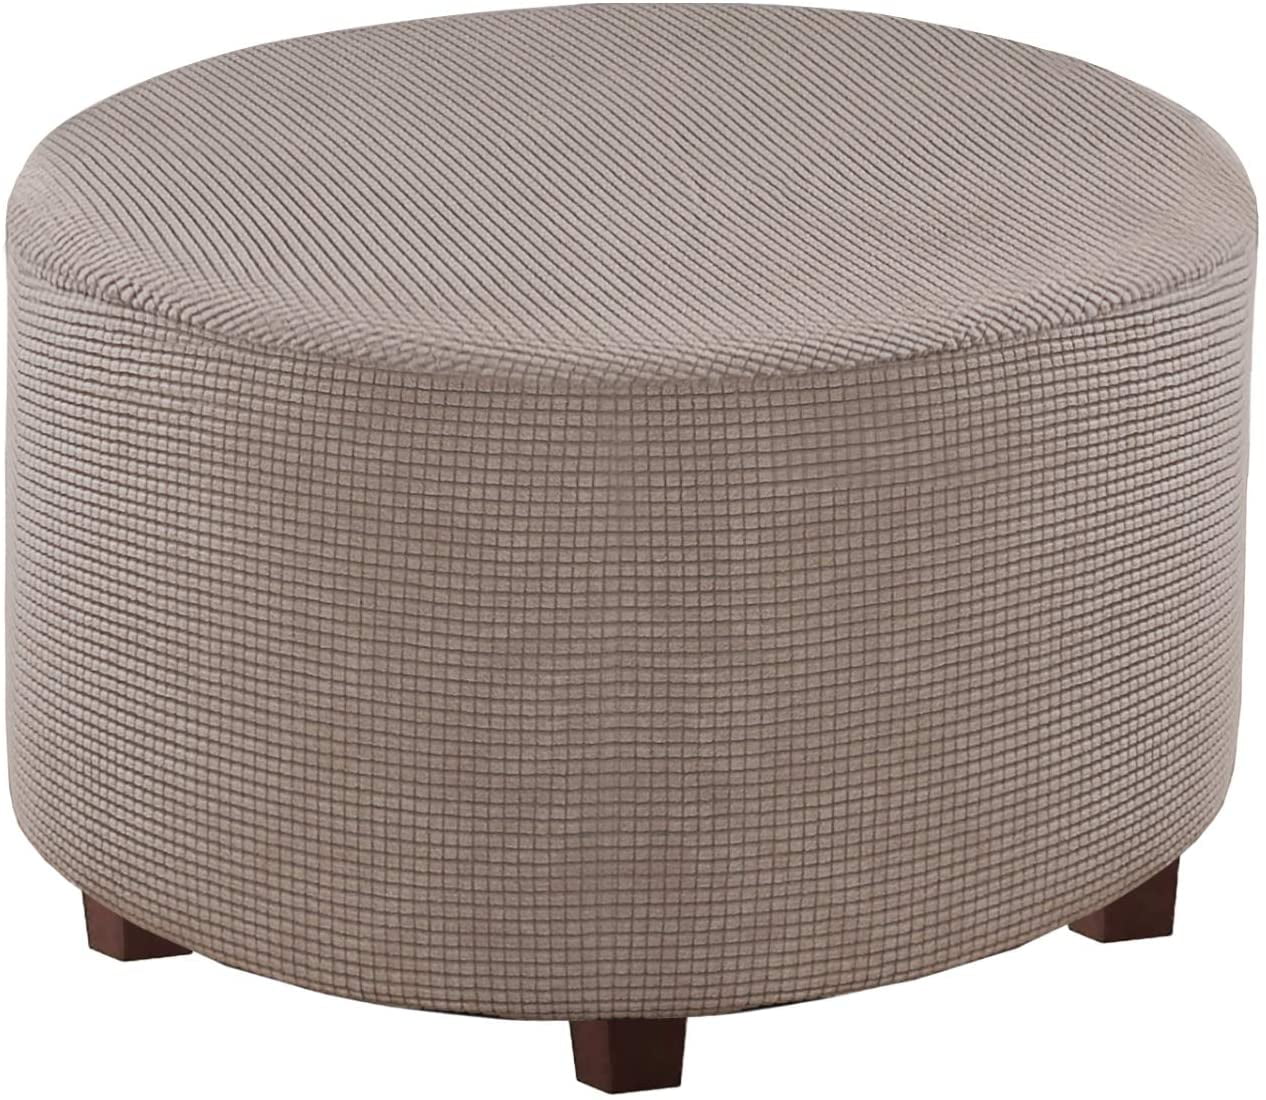 Storage Ottoman Stool Cover Replacement Footstool Stretch Grid Slipcover 